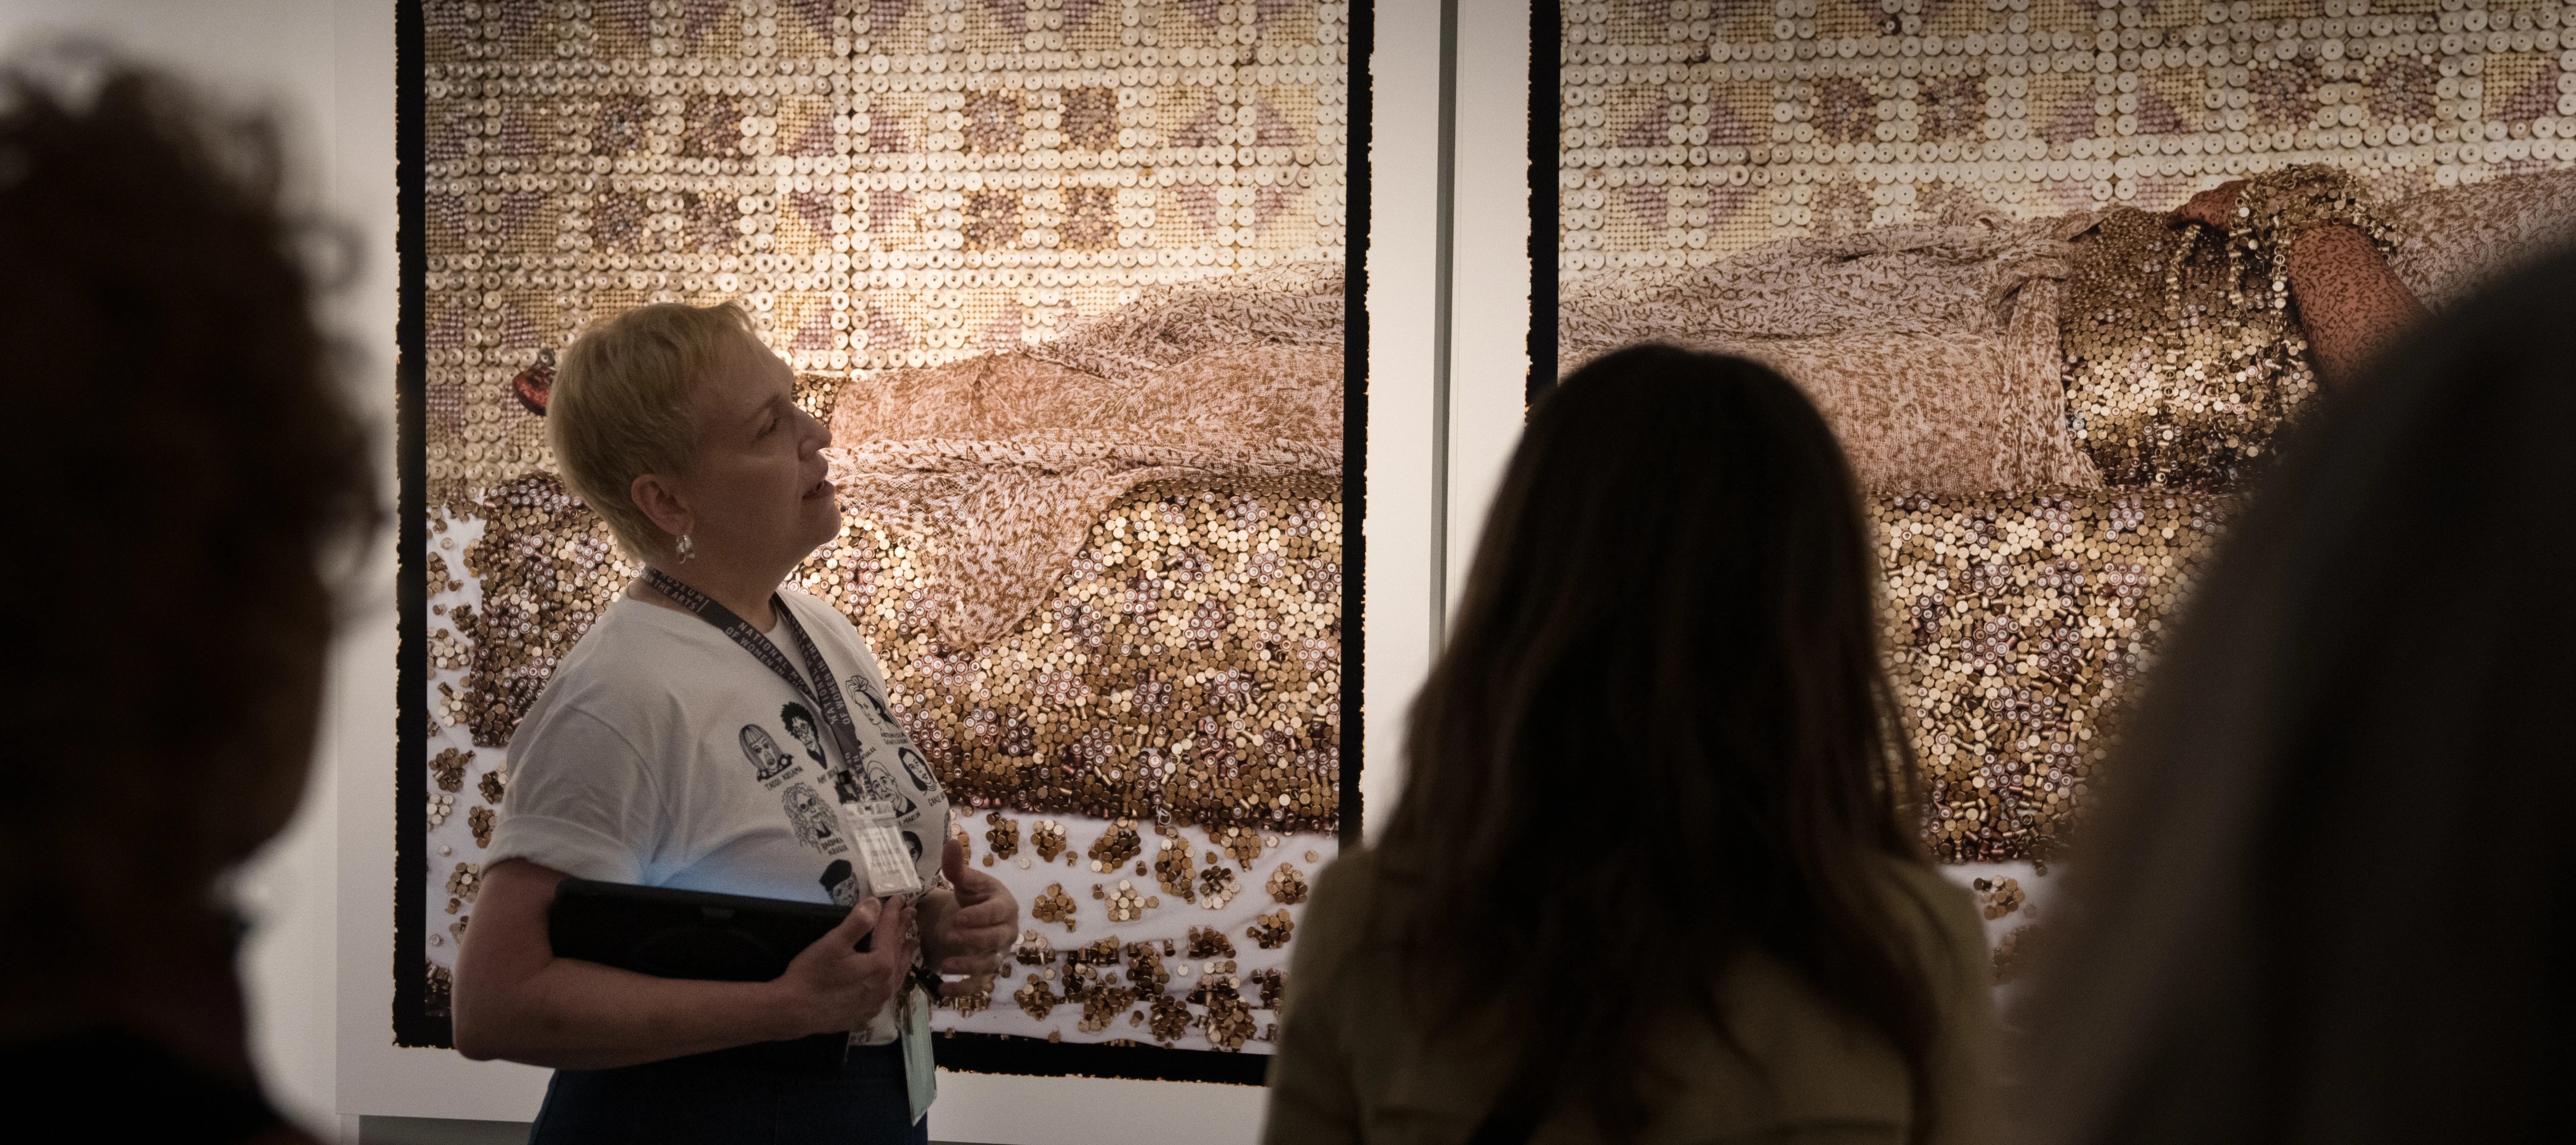 Museum visitors attend a docent-led tour.